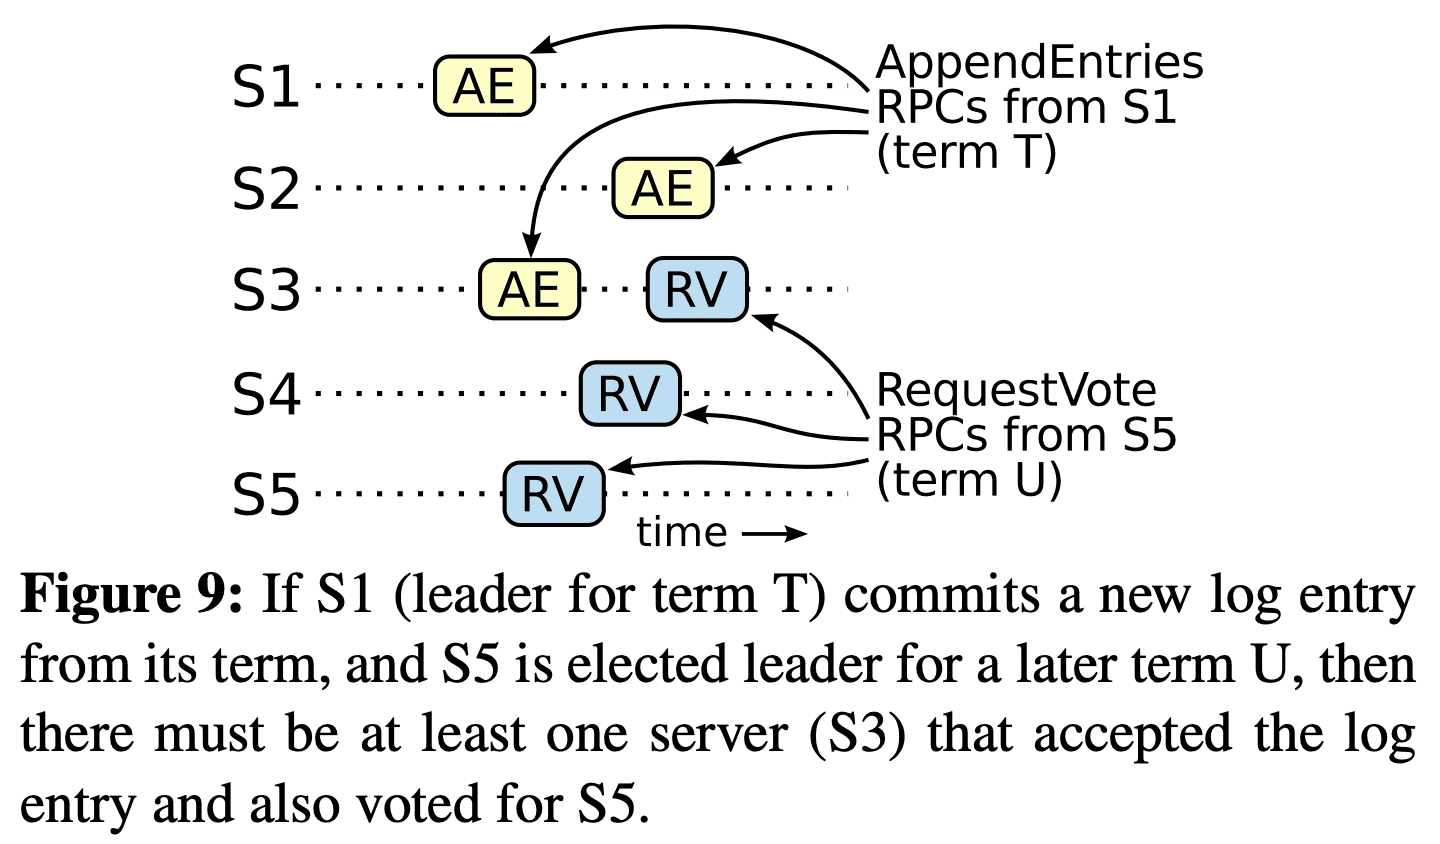 if s1 commits a new log entry from its term, and s5 is elected leader for a later term u, then there must be at least one server that accepted the log entry and also voted for s5